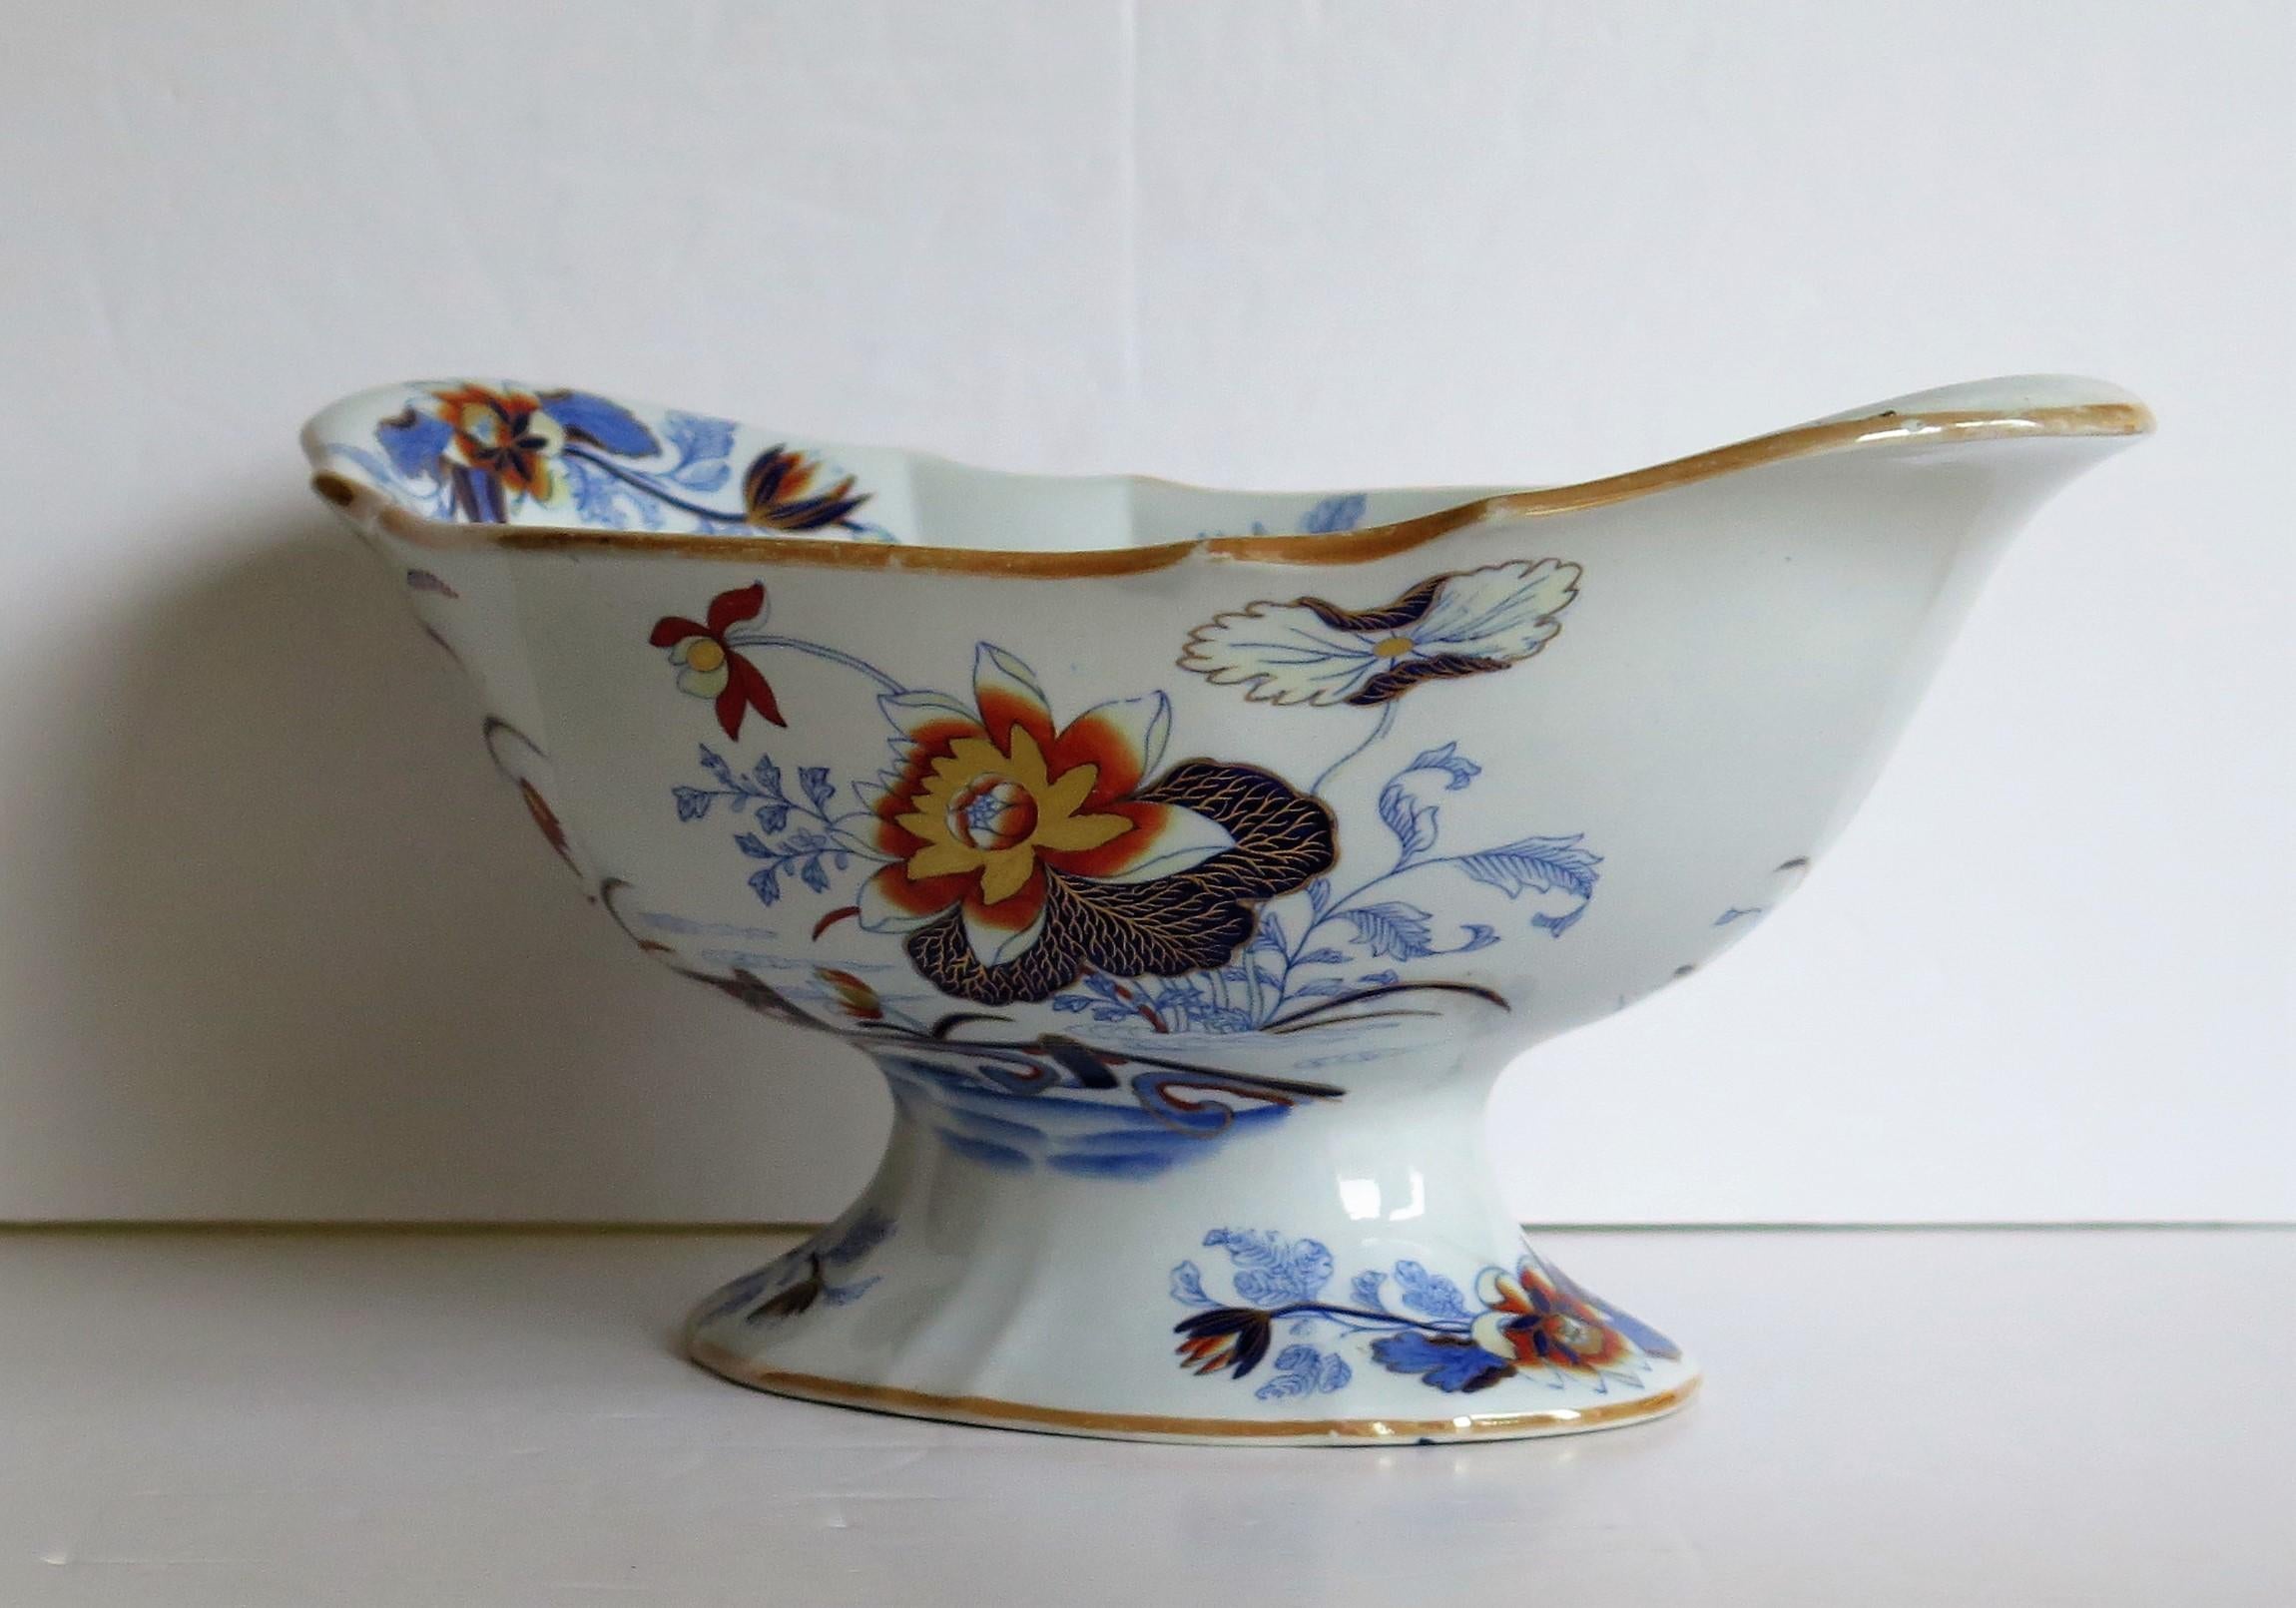 Chinoiserie Large Wedgwood Pedestal Bowl Centrepiece Stone China Ptn 1156, circa 1840 For Sale